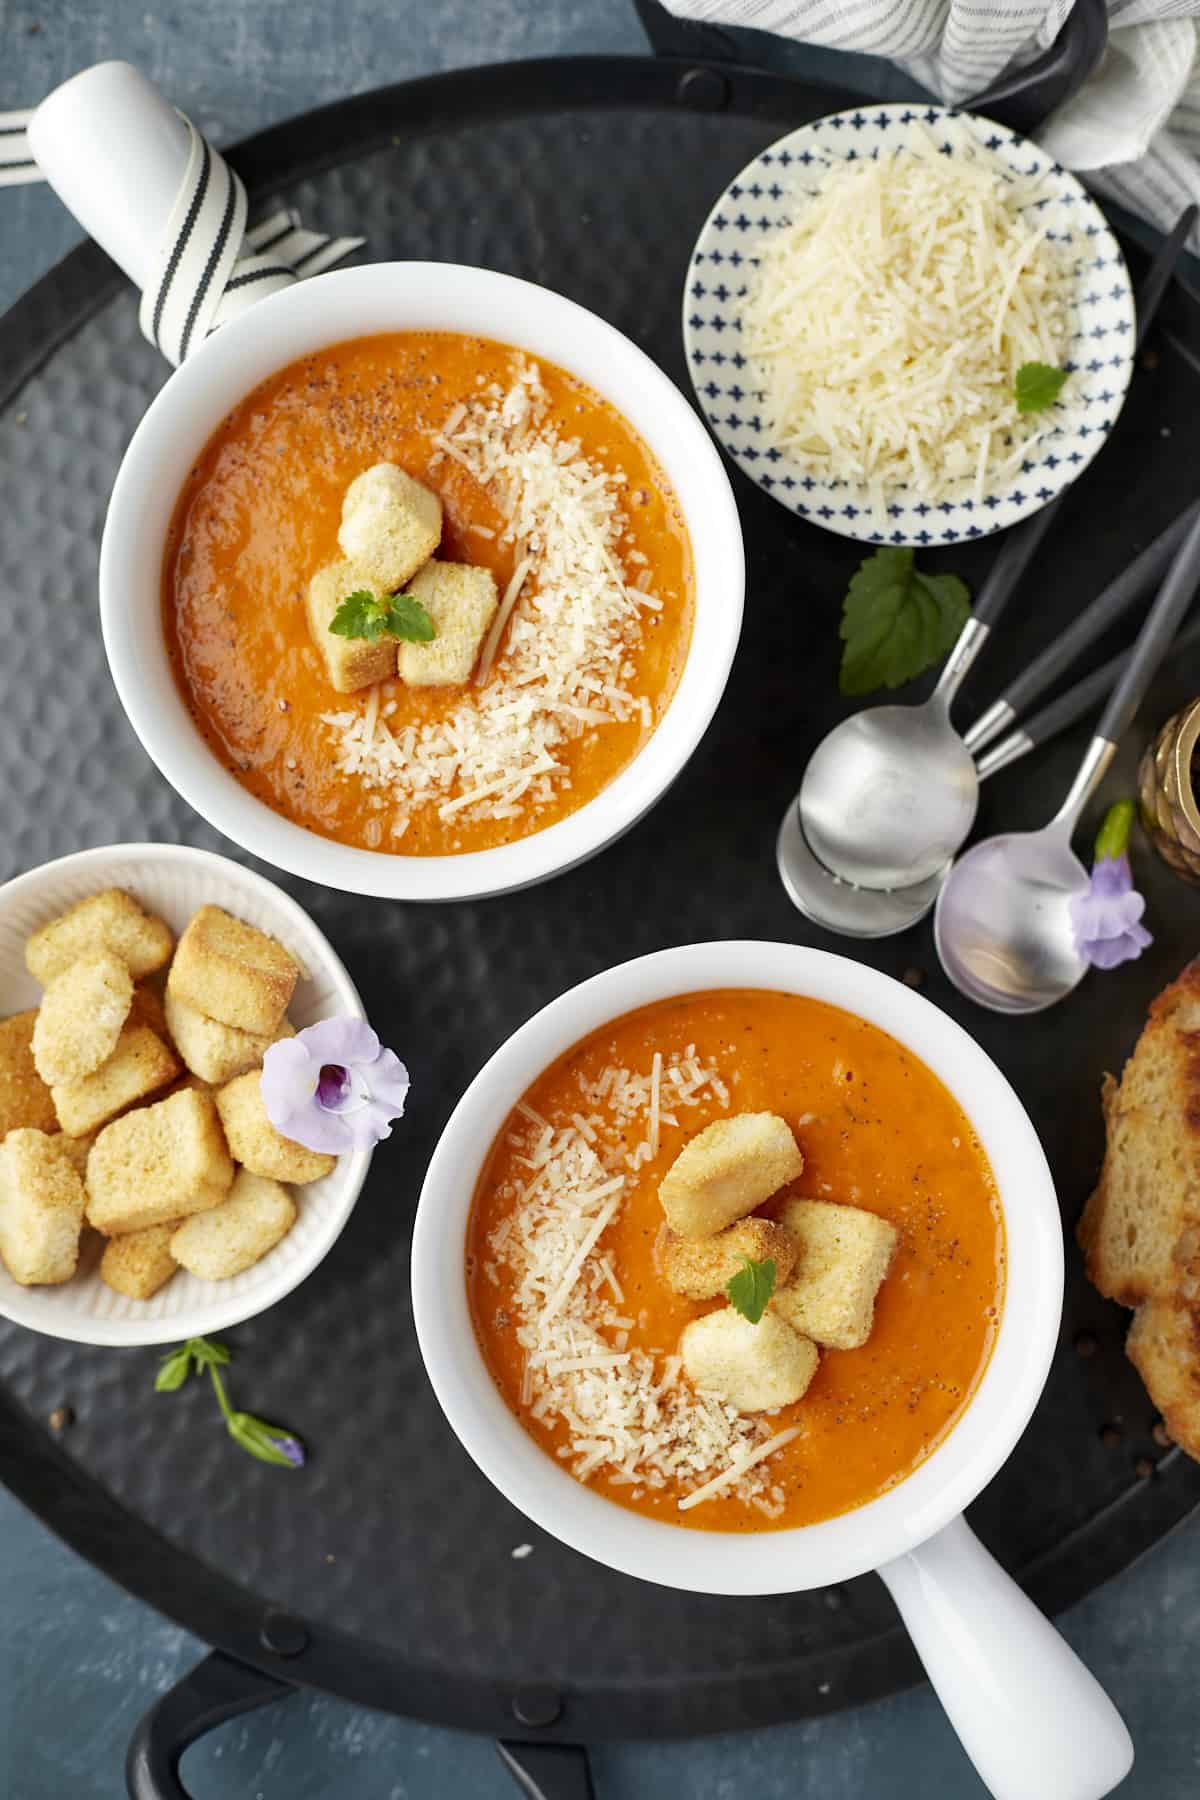 Roasted Tomato Soup with Parmesan Croutons. Two Soup Bowls garnish with parmesan cheese, croutons and basil.